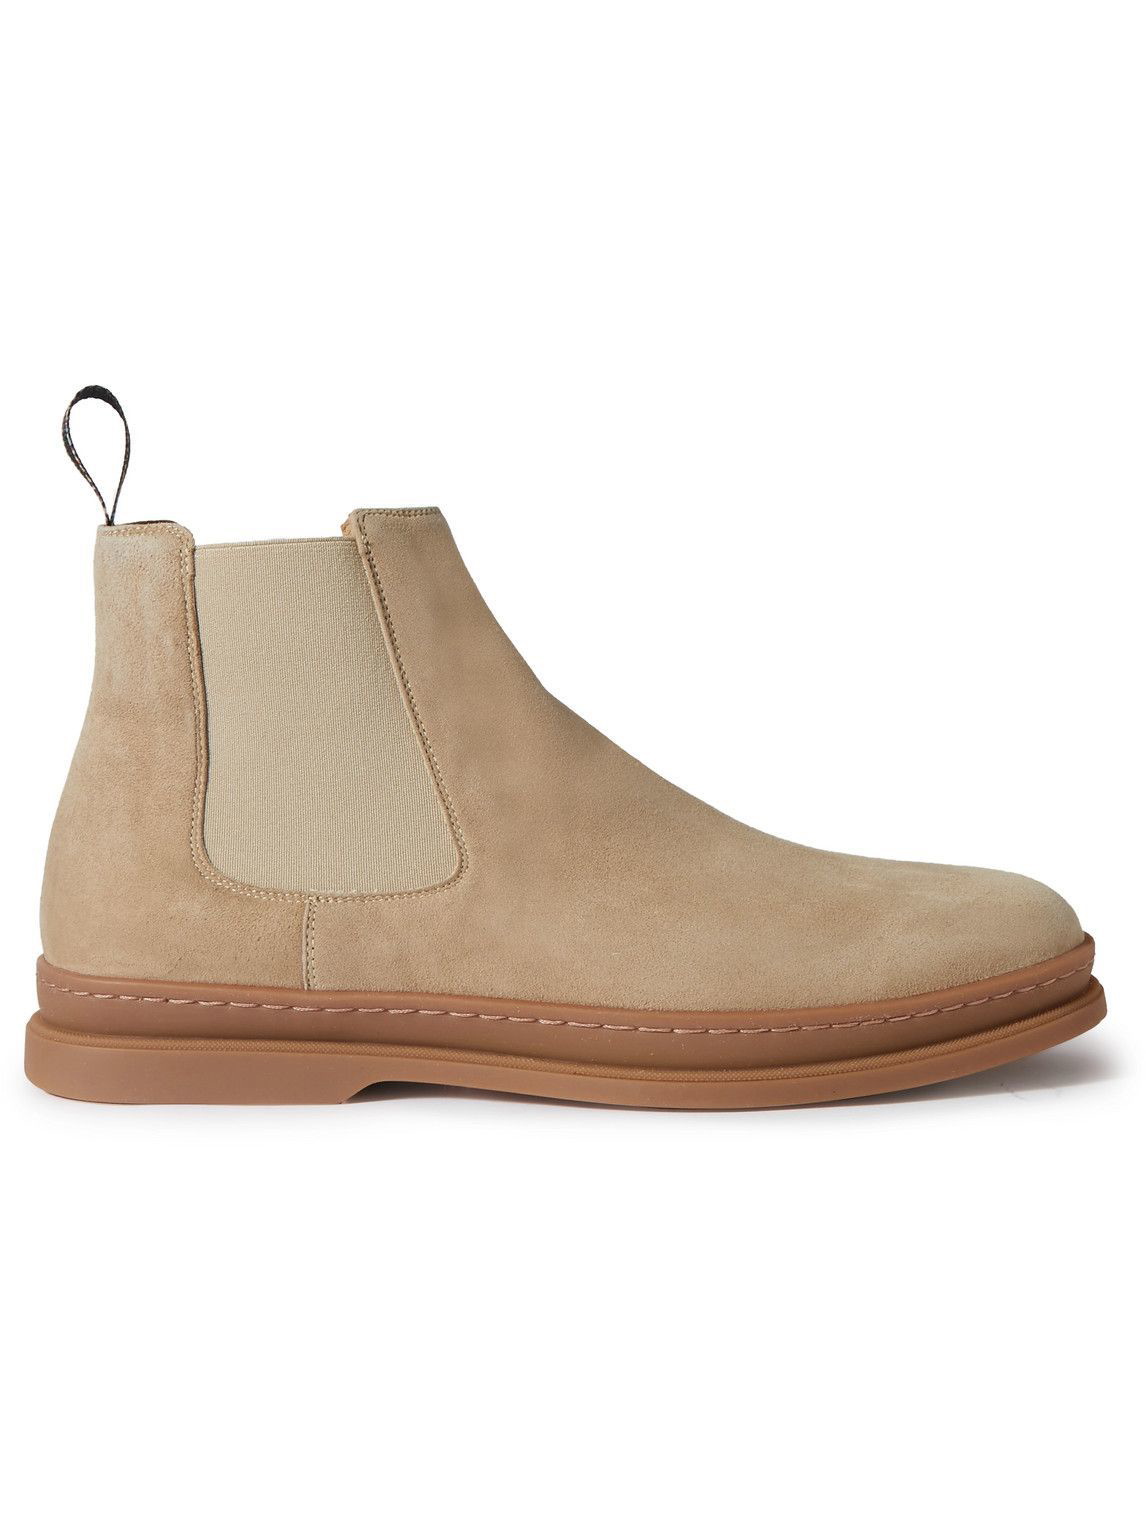 Paul Smith - Ugo Suede Chelsea Boots Neutrals Paul Smith